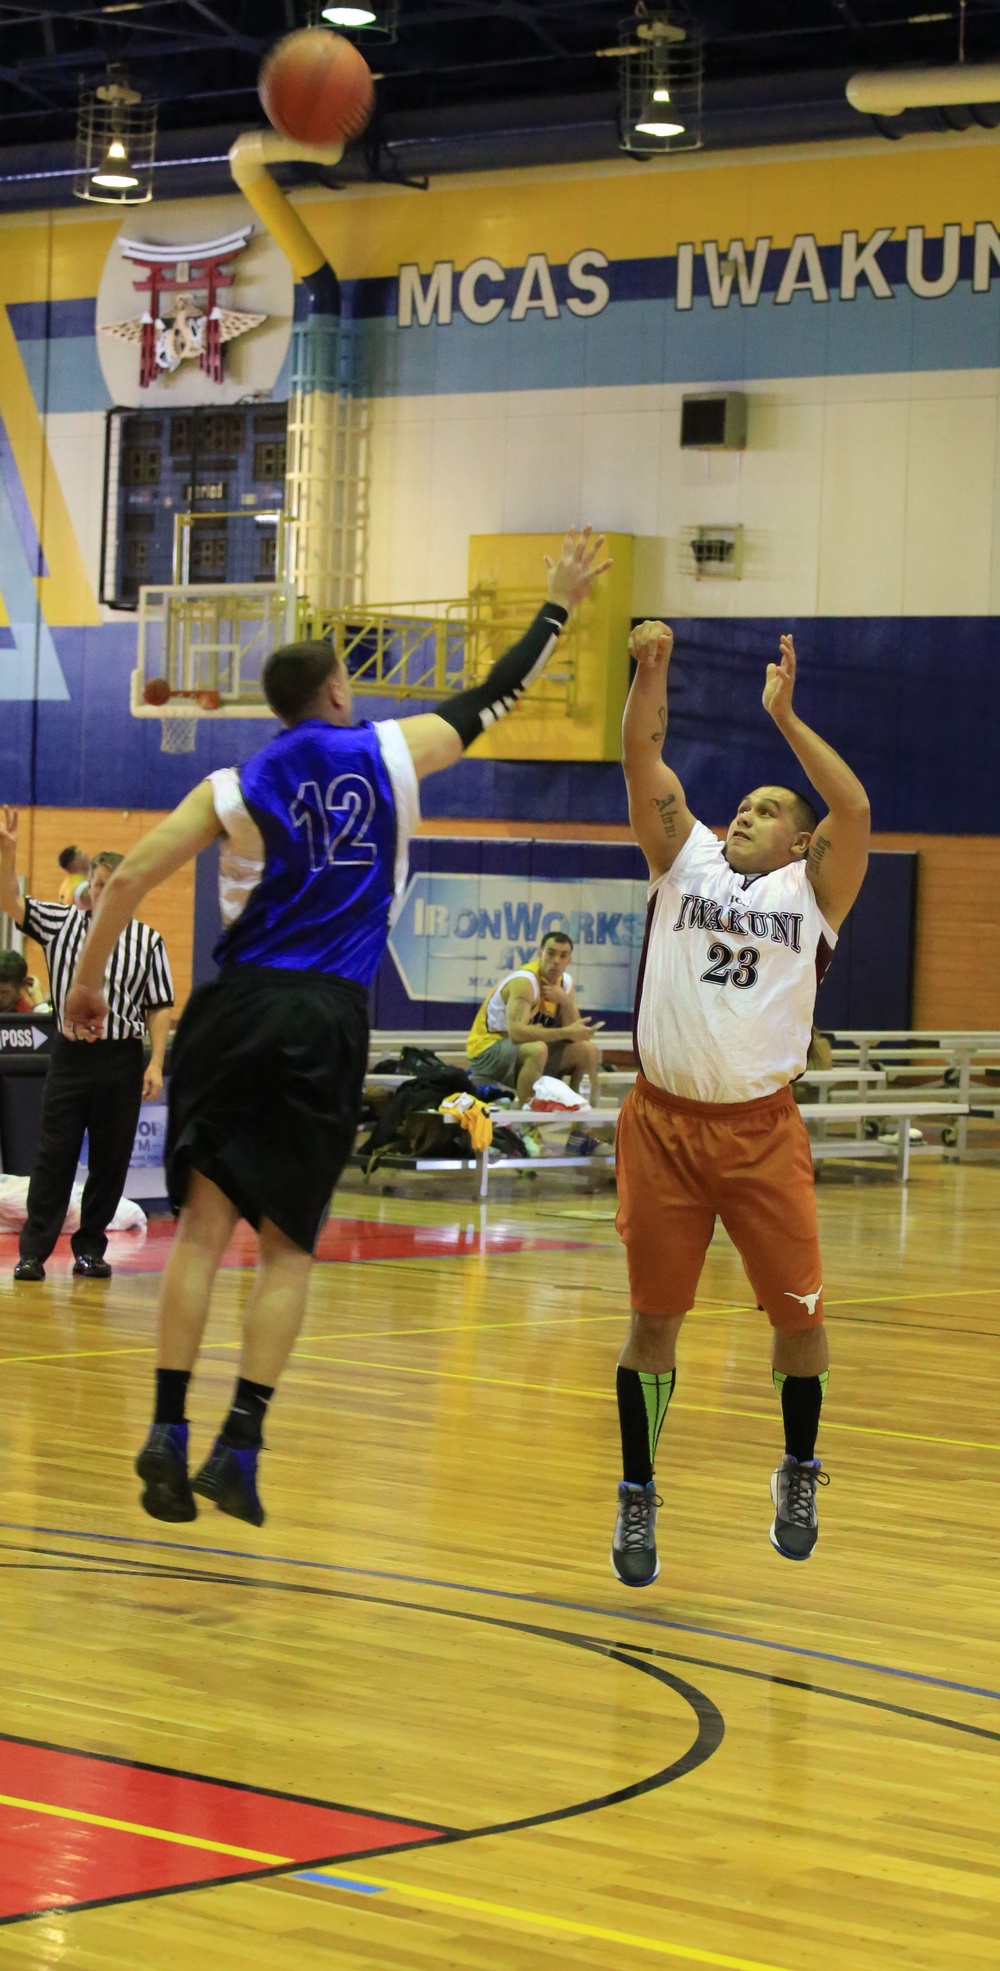 MWSS-171 places first at basketball tournament